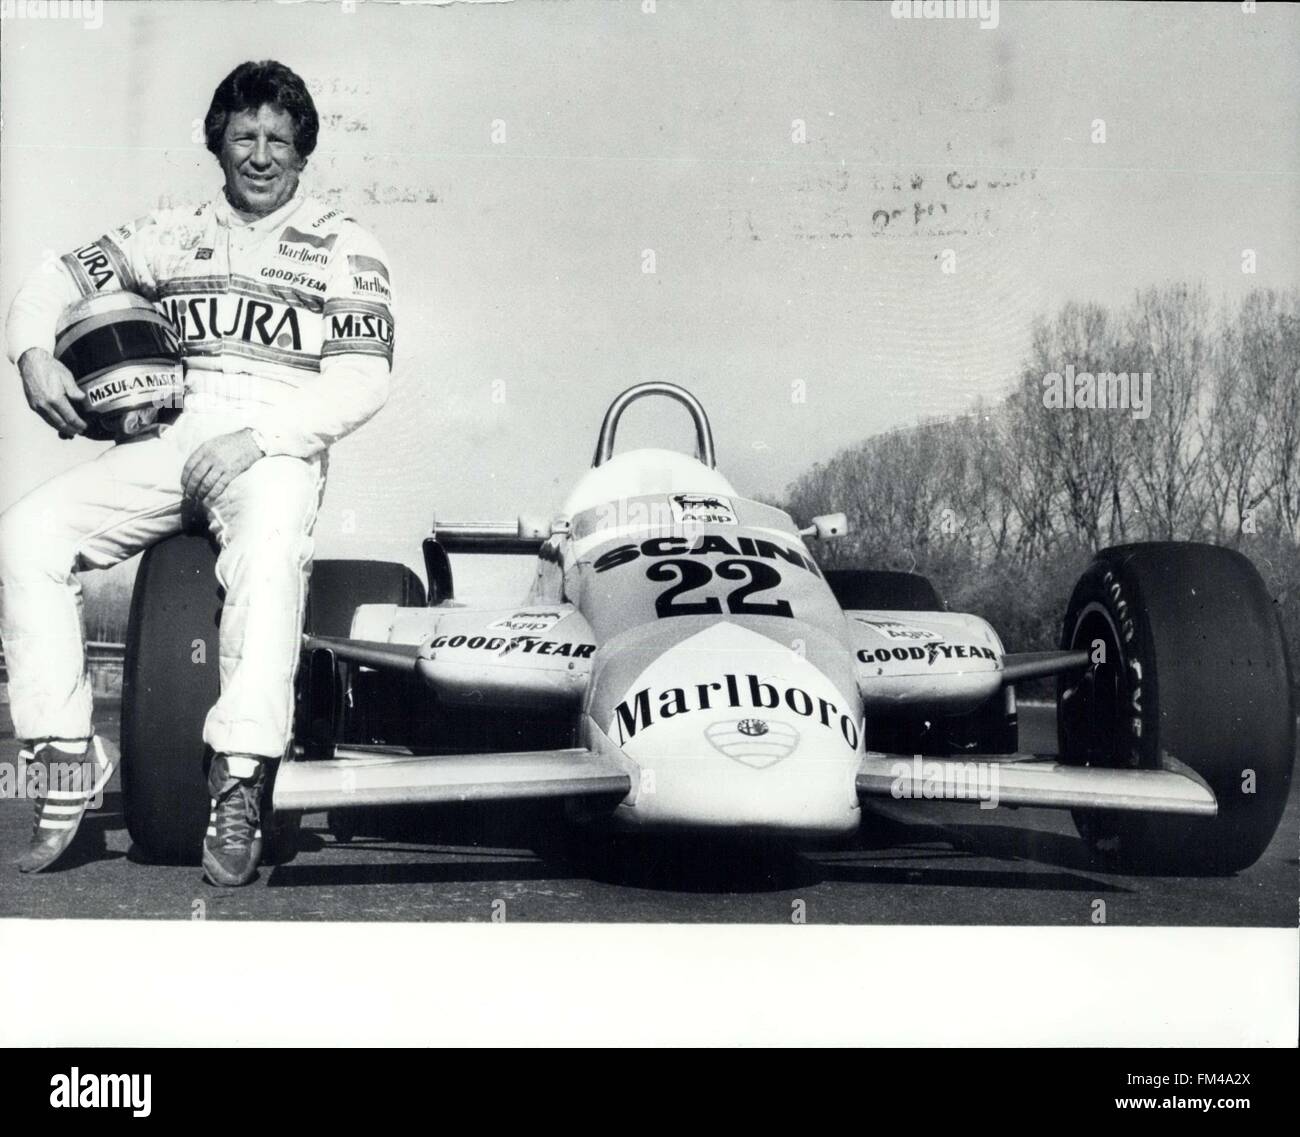 1981 - Mario Andretti Tests The New Alfa-Romeo: Pictured at the Balocco racing track near Milan, is Mario Andretti, the American racing driver, after a test run in the new Alfa Romeo which he will be driving in the World Championship in 1981. © Keystone Pictures USA/ZUMAPRESS.com/Alamy Live News Stock Photo